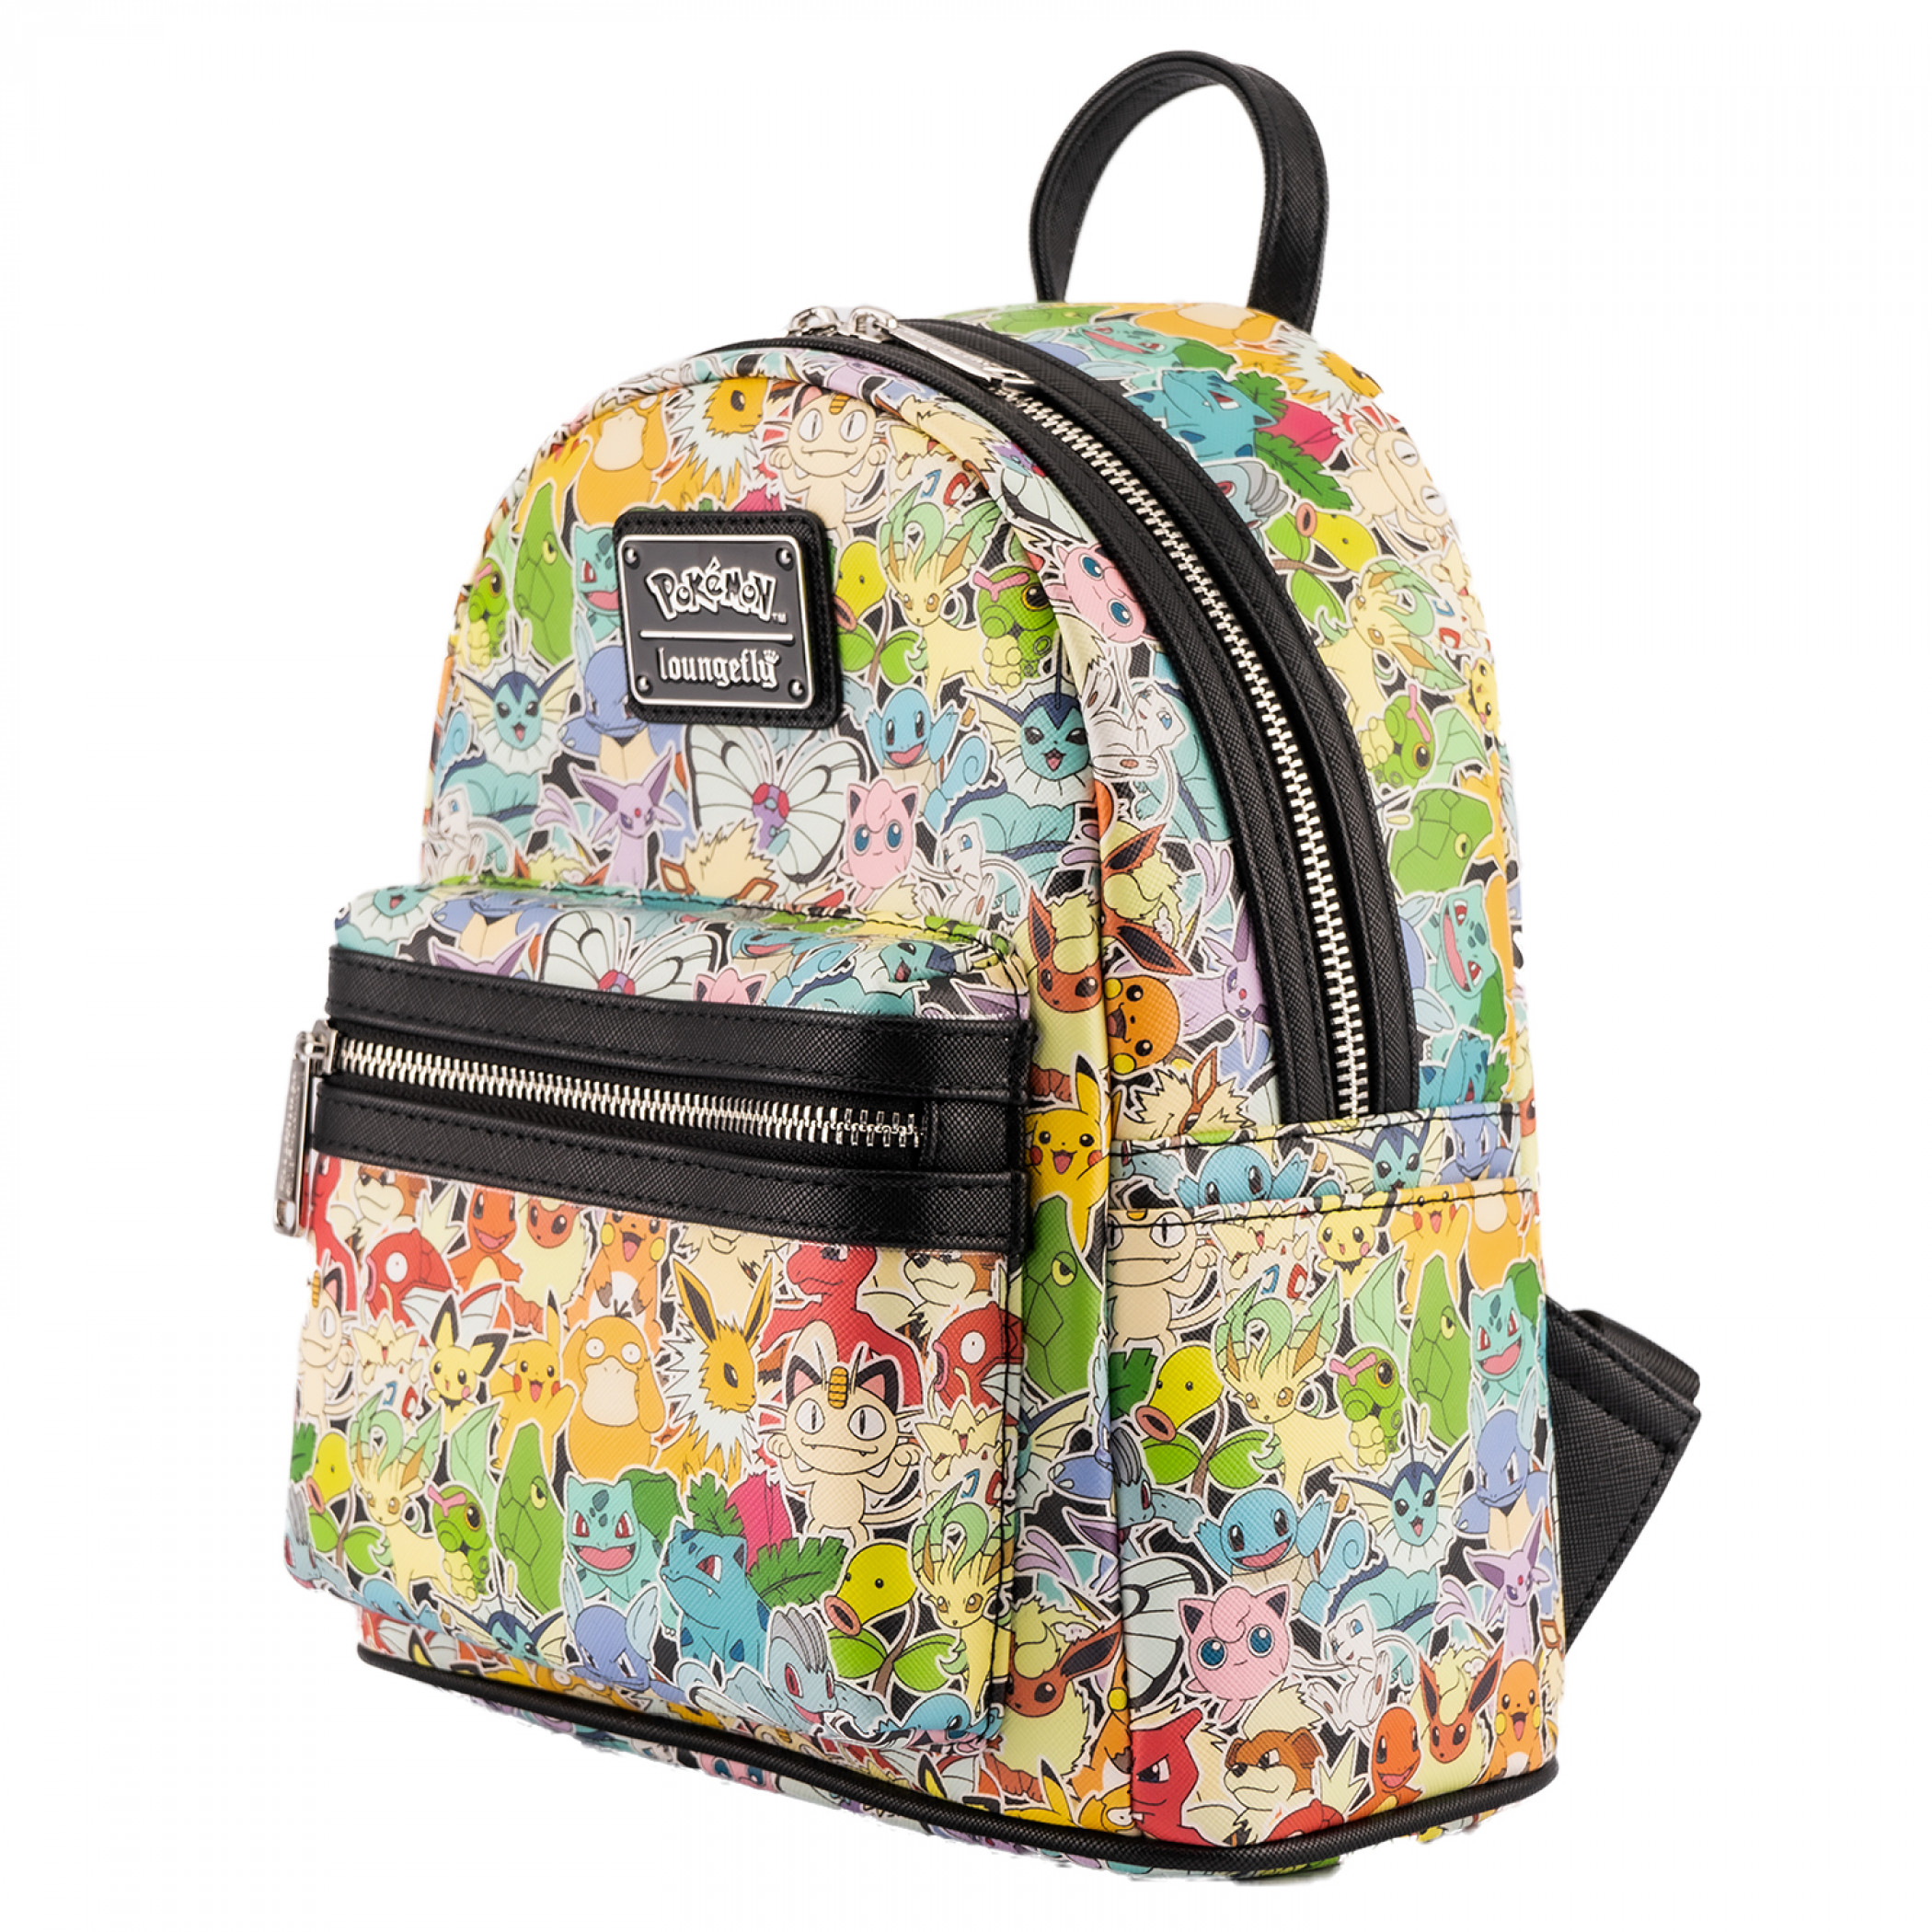 Pokemon Characters Ombre Loungefly Mini Backpack